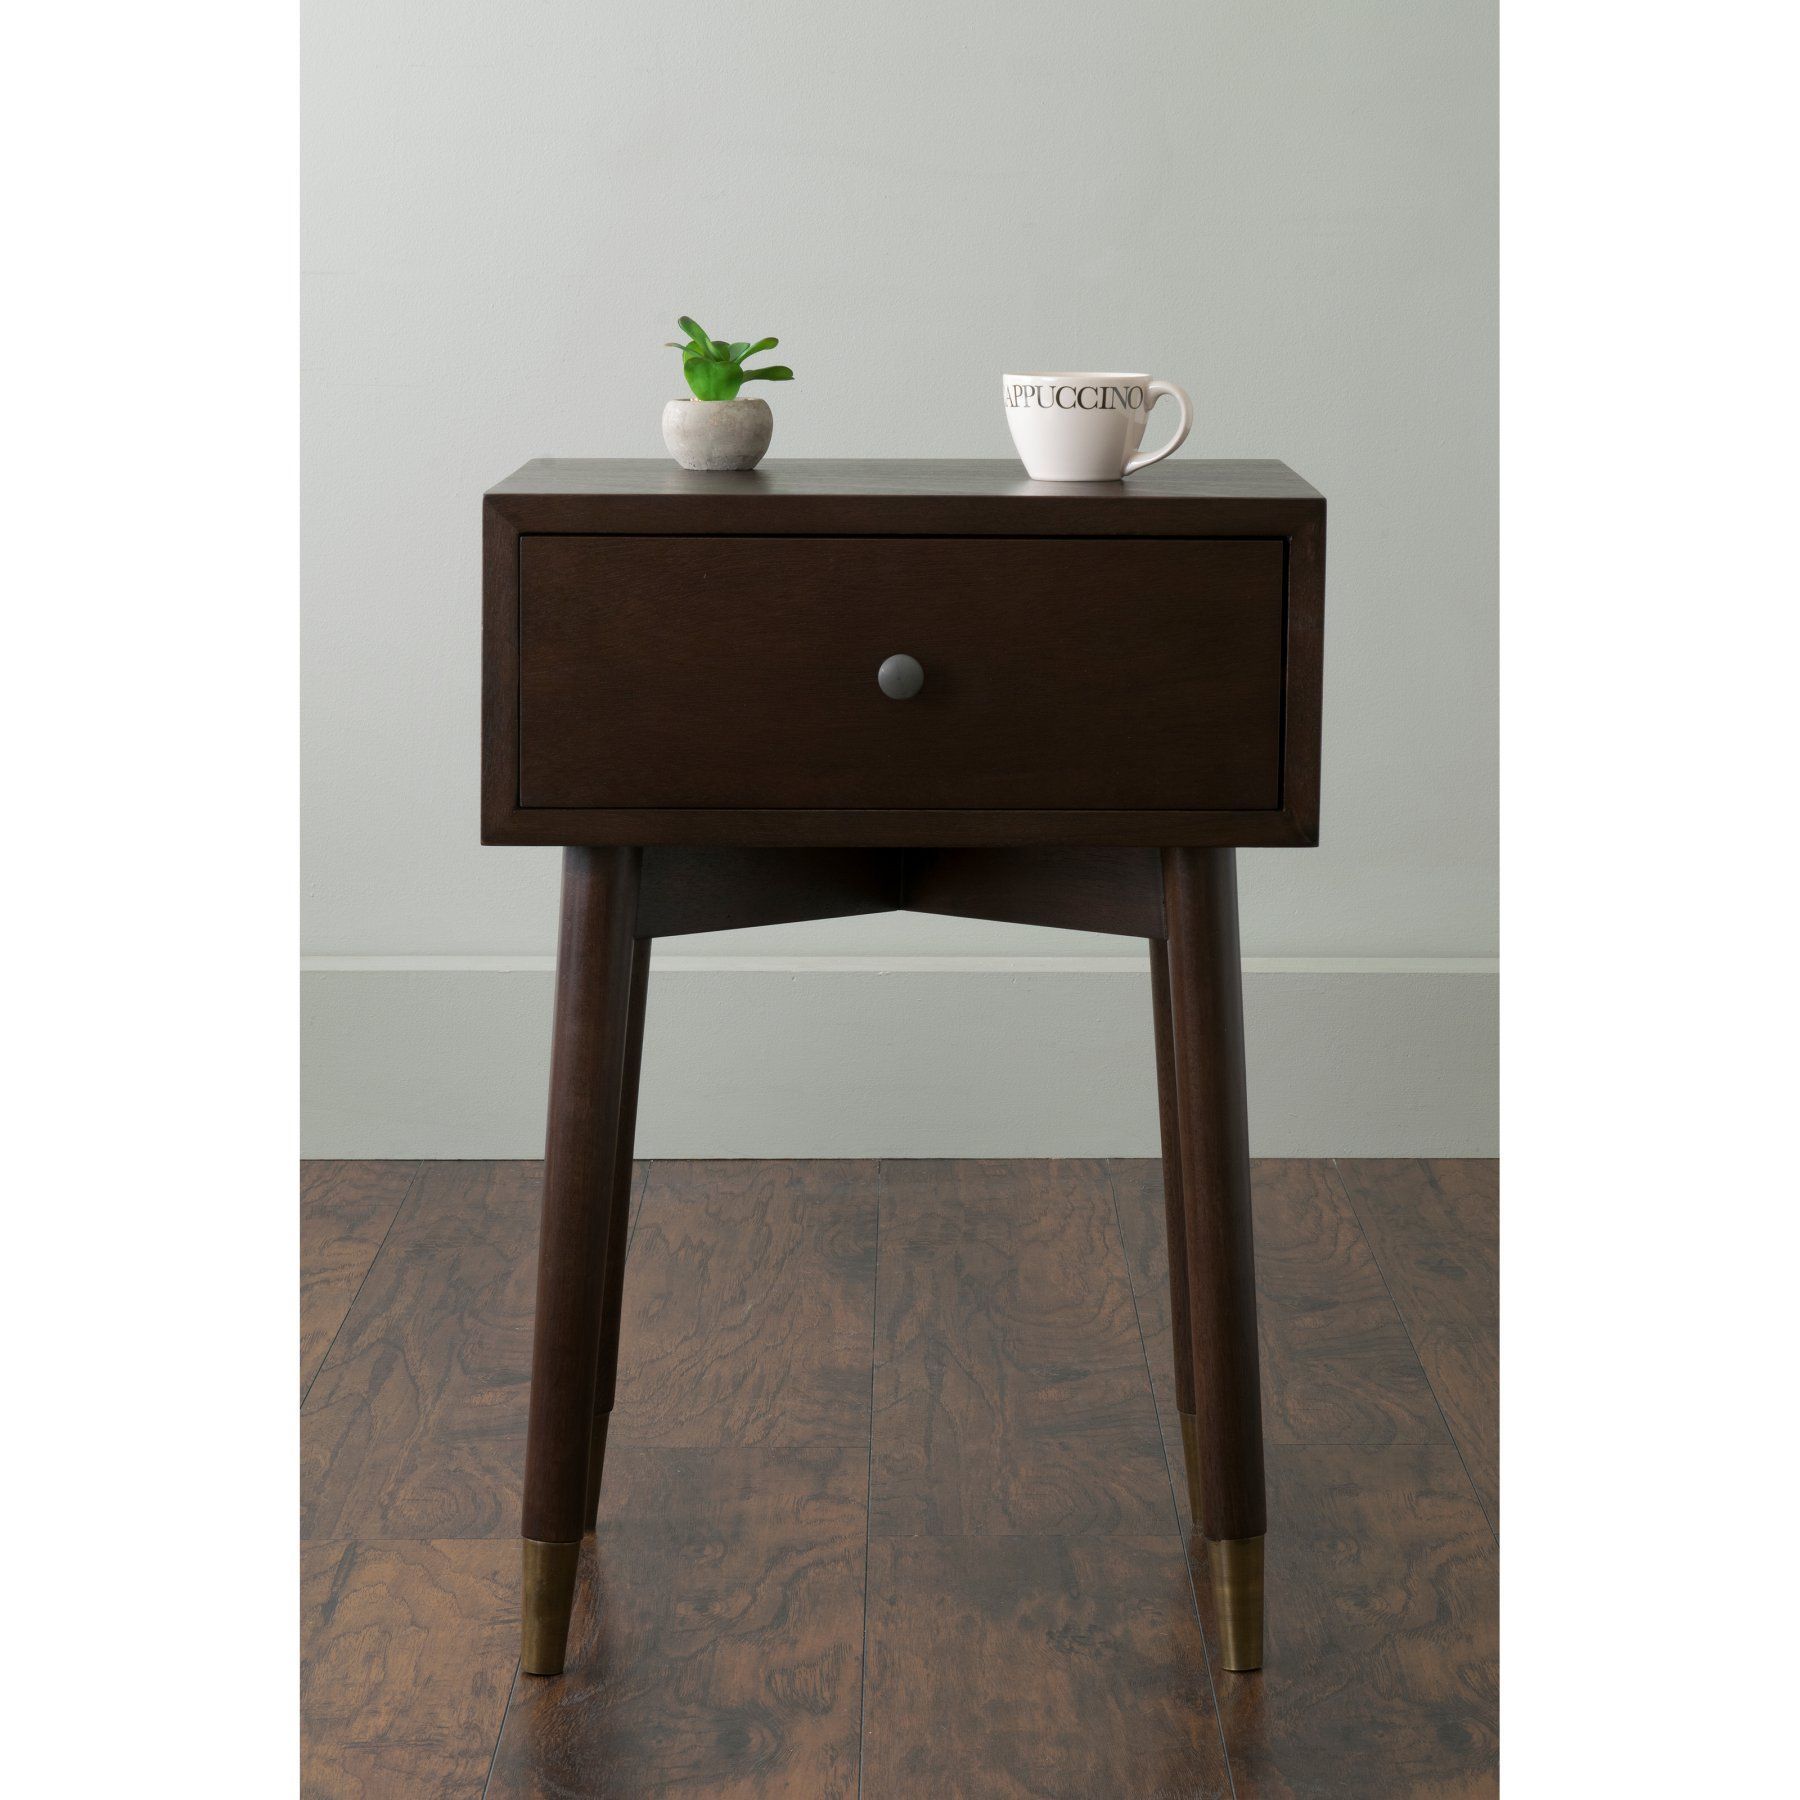 east main weeks acacia wood square accent table with drawer wrought iron nesting tables kitchen decor dark brown end target chairs pottery barn flower power station coffee white